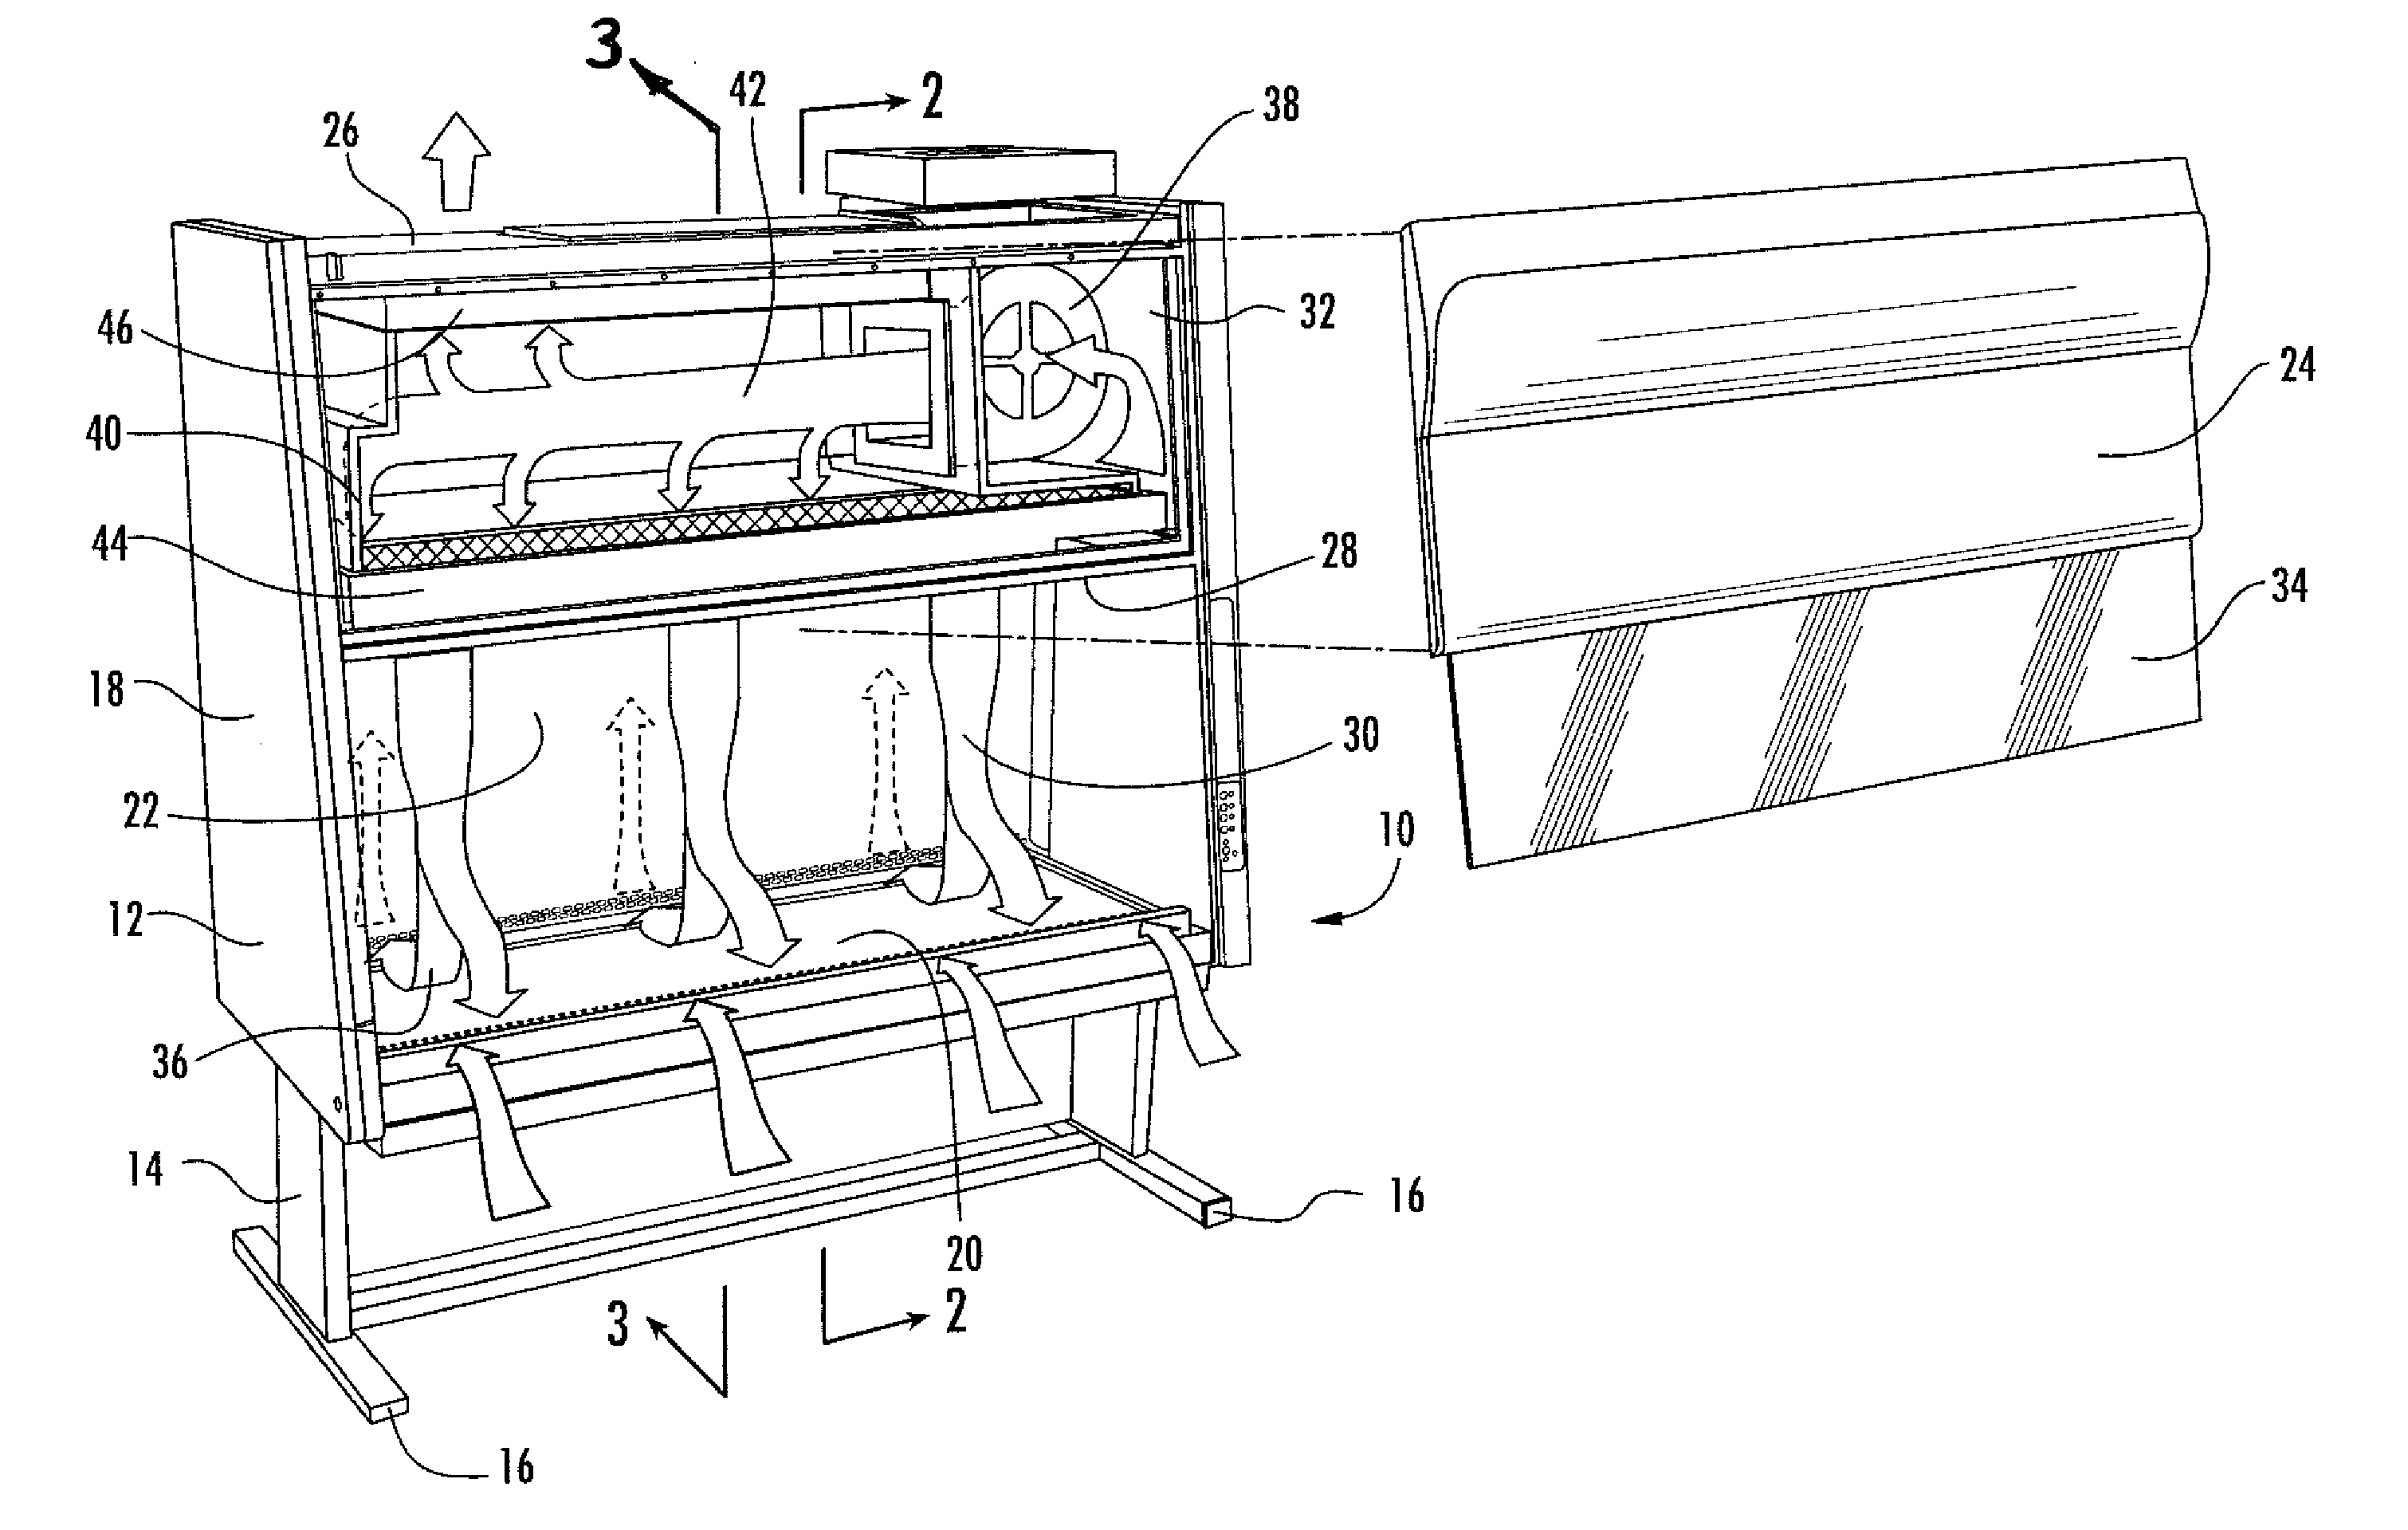 Apparatus for directing air flow in a biological safety cabinet